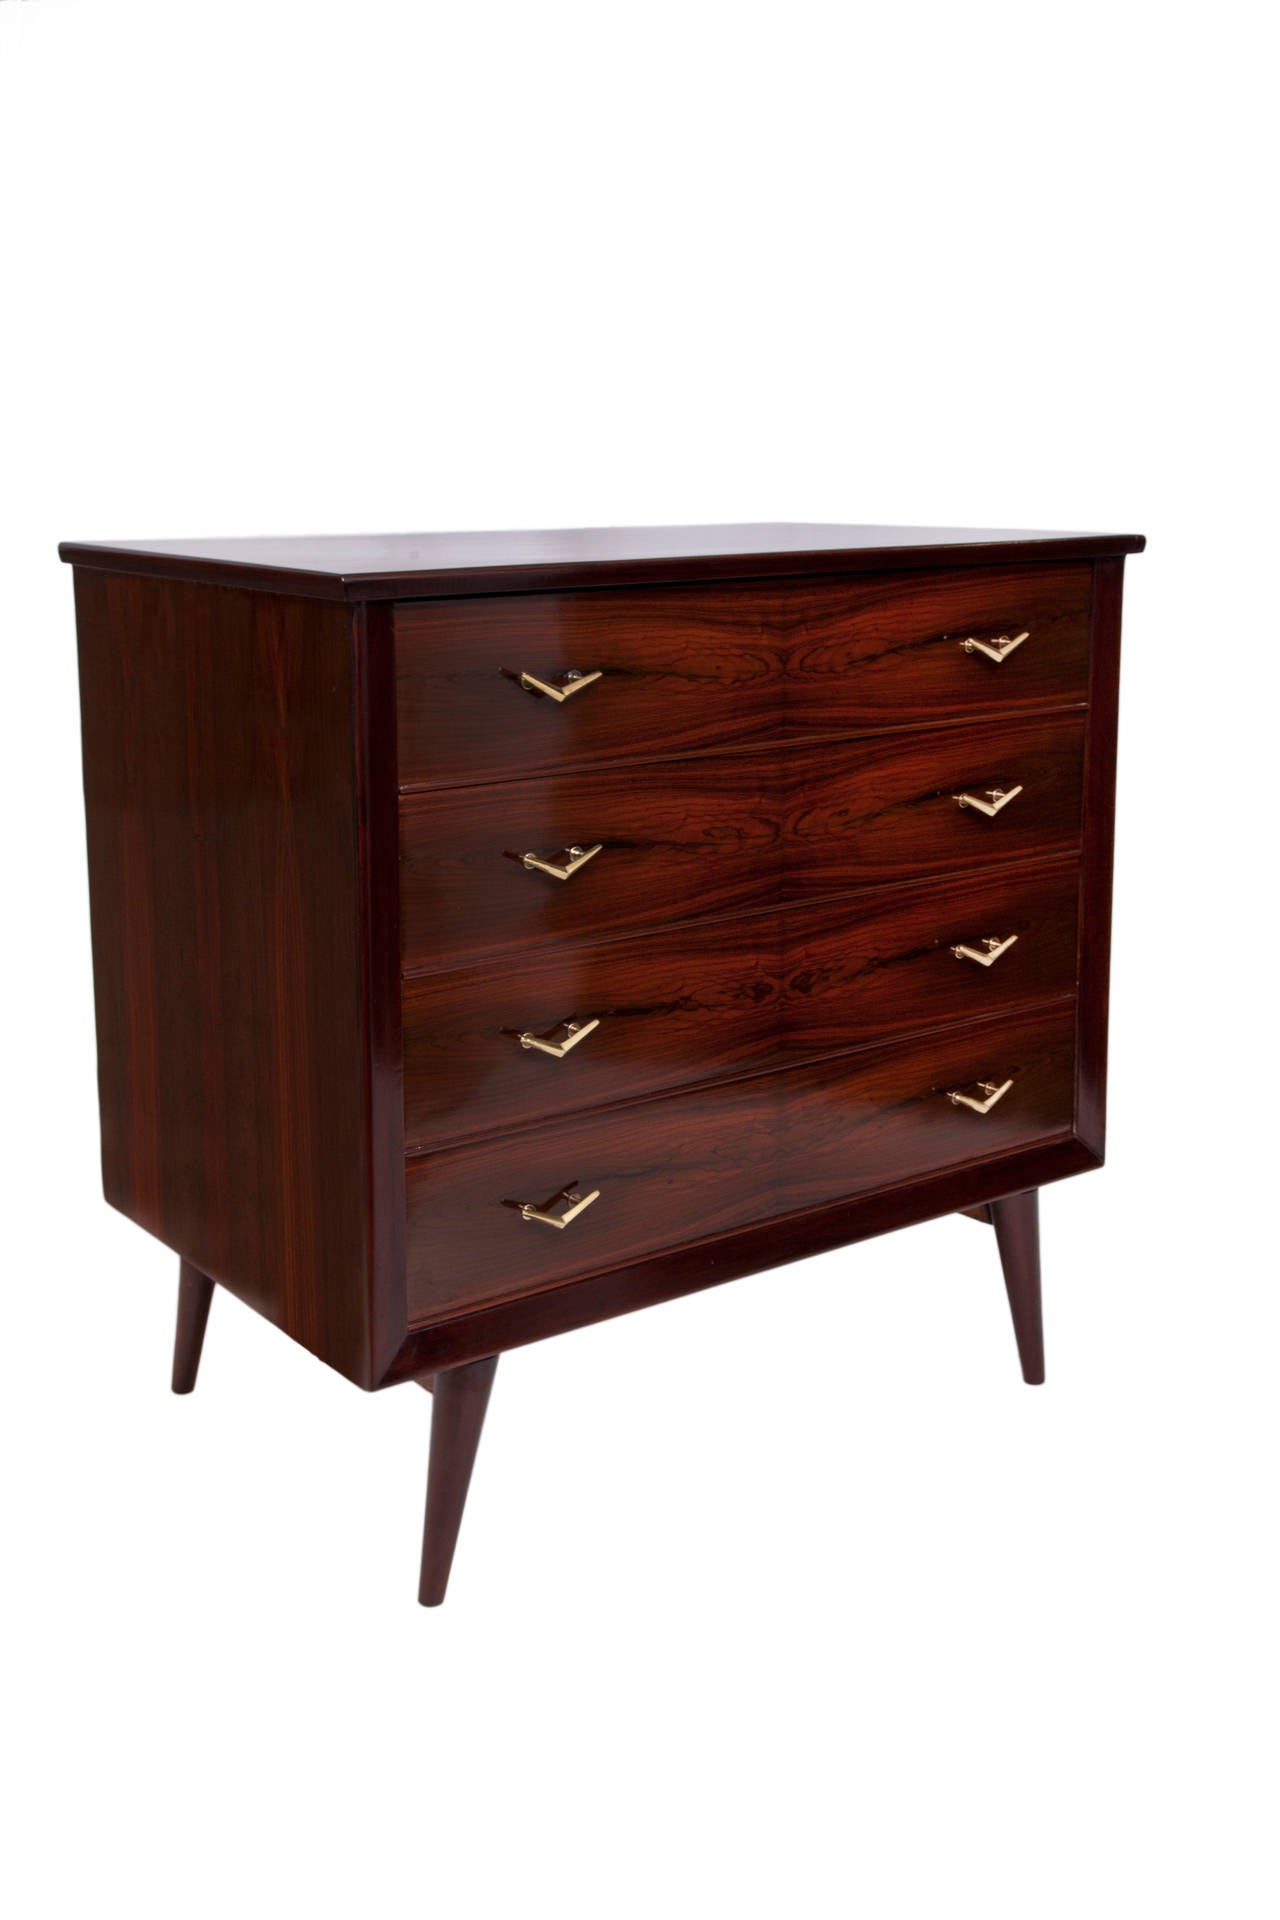 A vintage, circa 1950s four drawer dresser, in Brazilian jacaranda veneer against caviuna wood, with brass handle details, on gracefully angled tapered legs. Very good condition, consistent with age and use. 